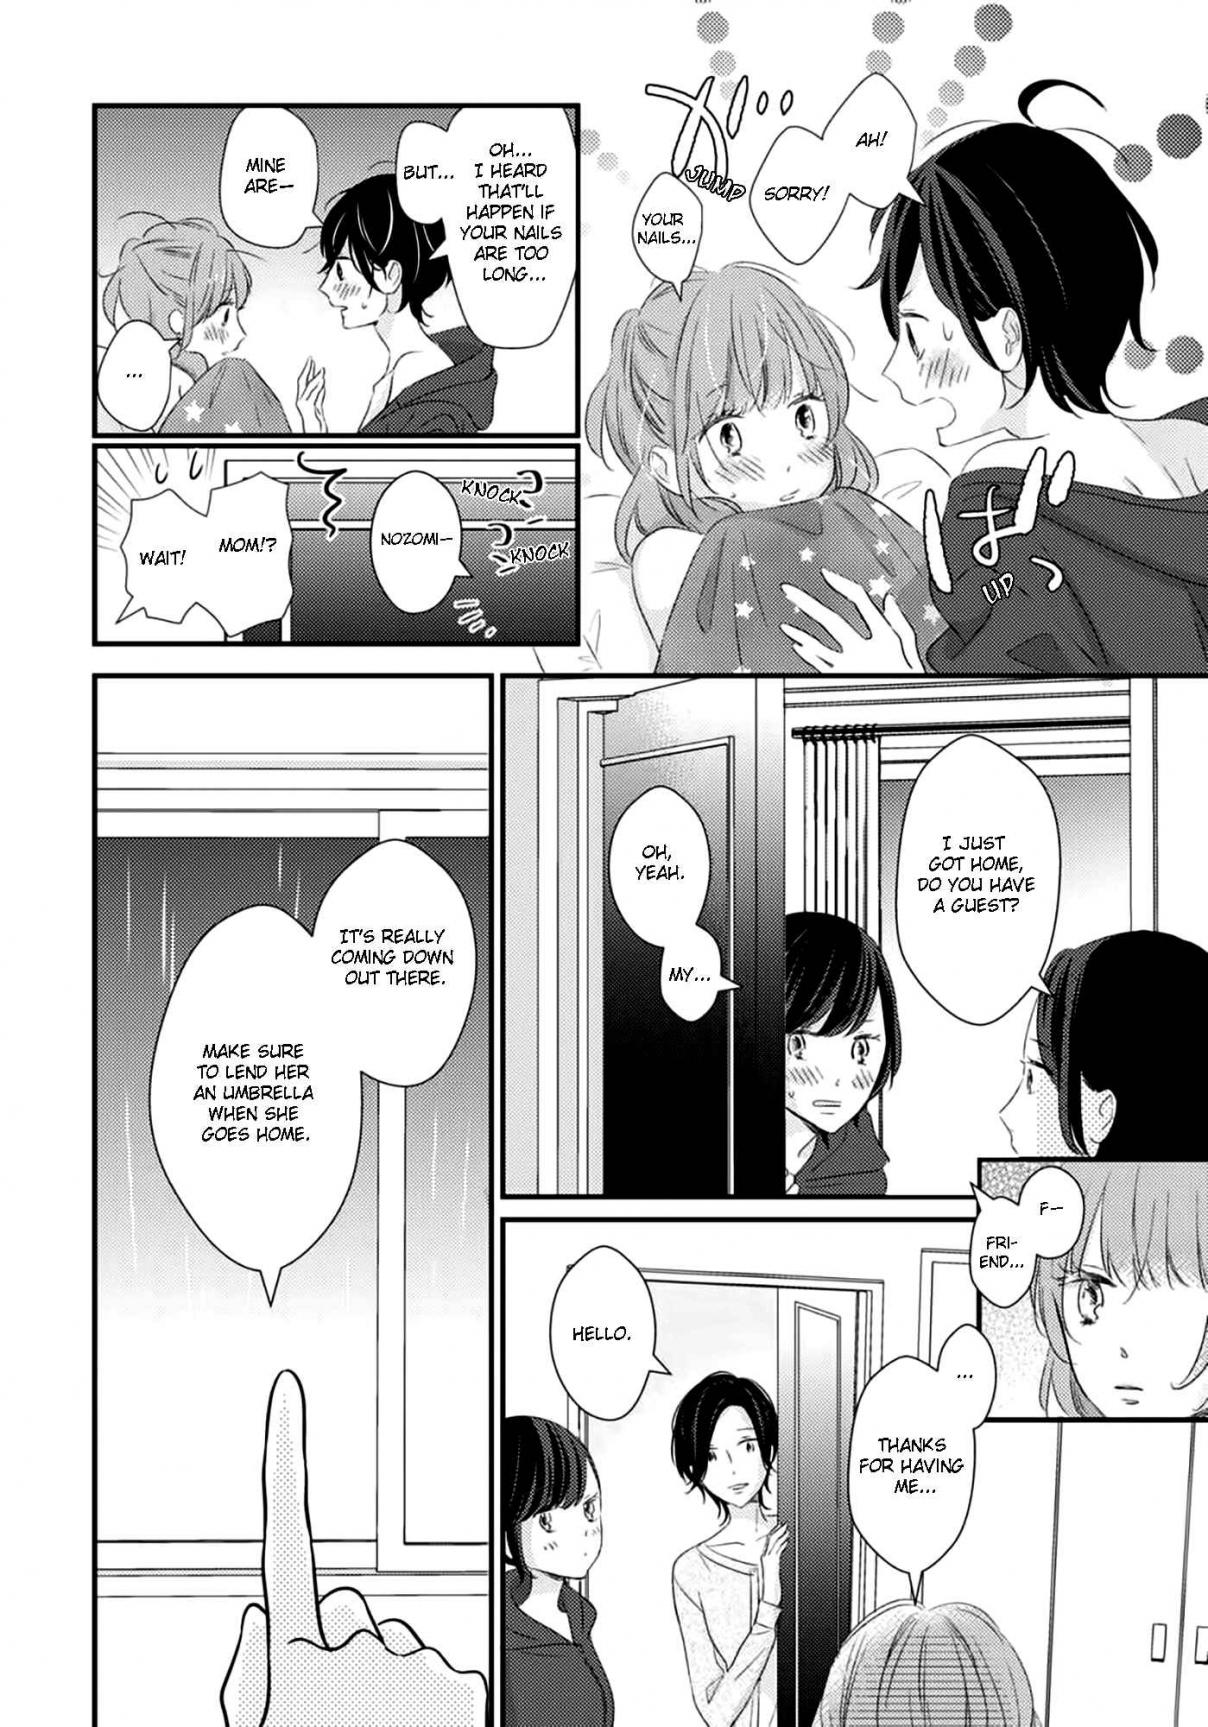 I Don't Know Why, but I Suddenly Wanted to Have Sex with My Coworker Who Sits Next to Me Vol. 1 Ch. 2 Bedroom Telepathy